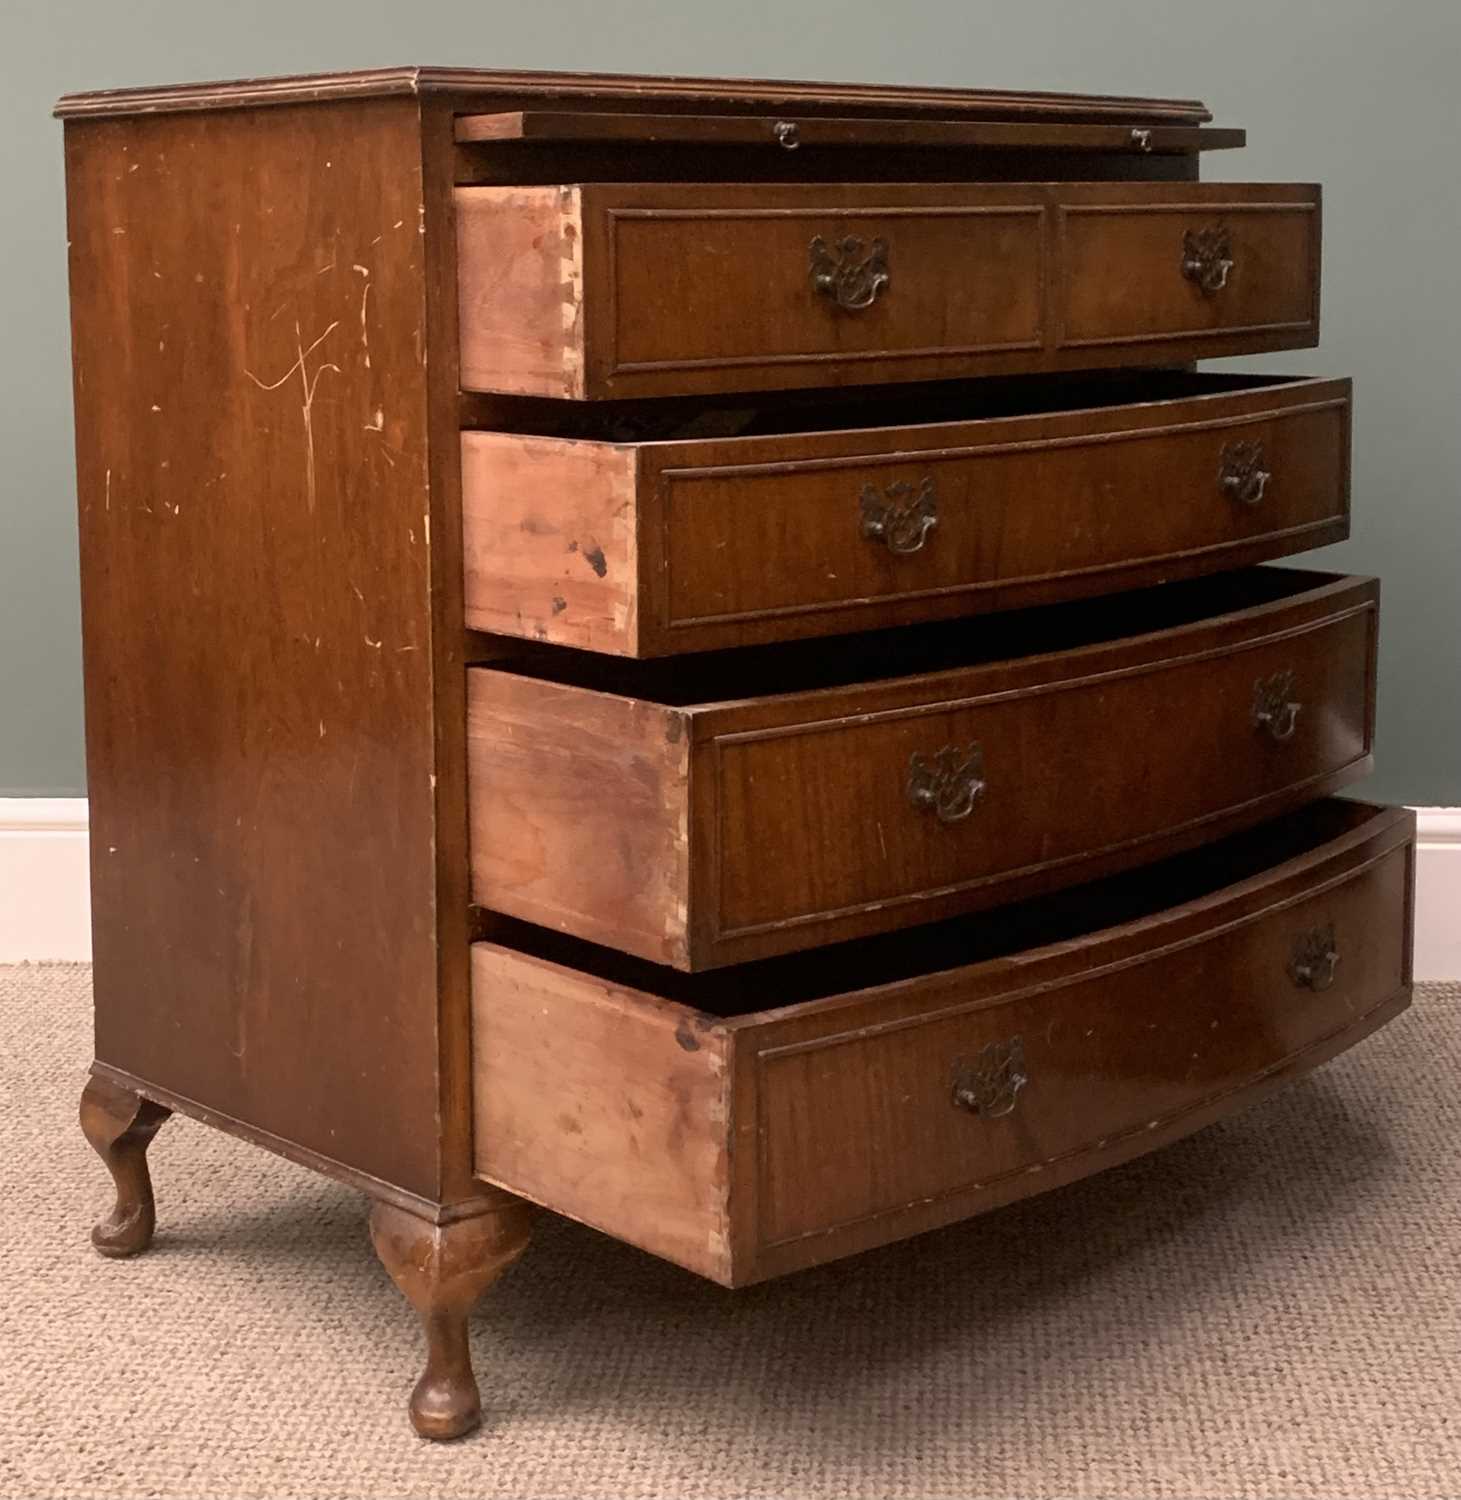 REPRODUCTION MAHOGANY BOW FRONT FOUR DRAWER CHEST, with brush slider, 83 (h) x 77 (w) x 45cms (d) - Image 2 of 5